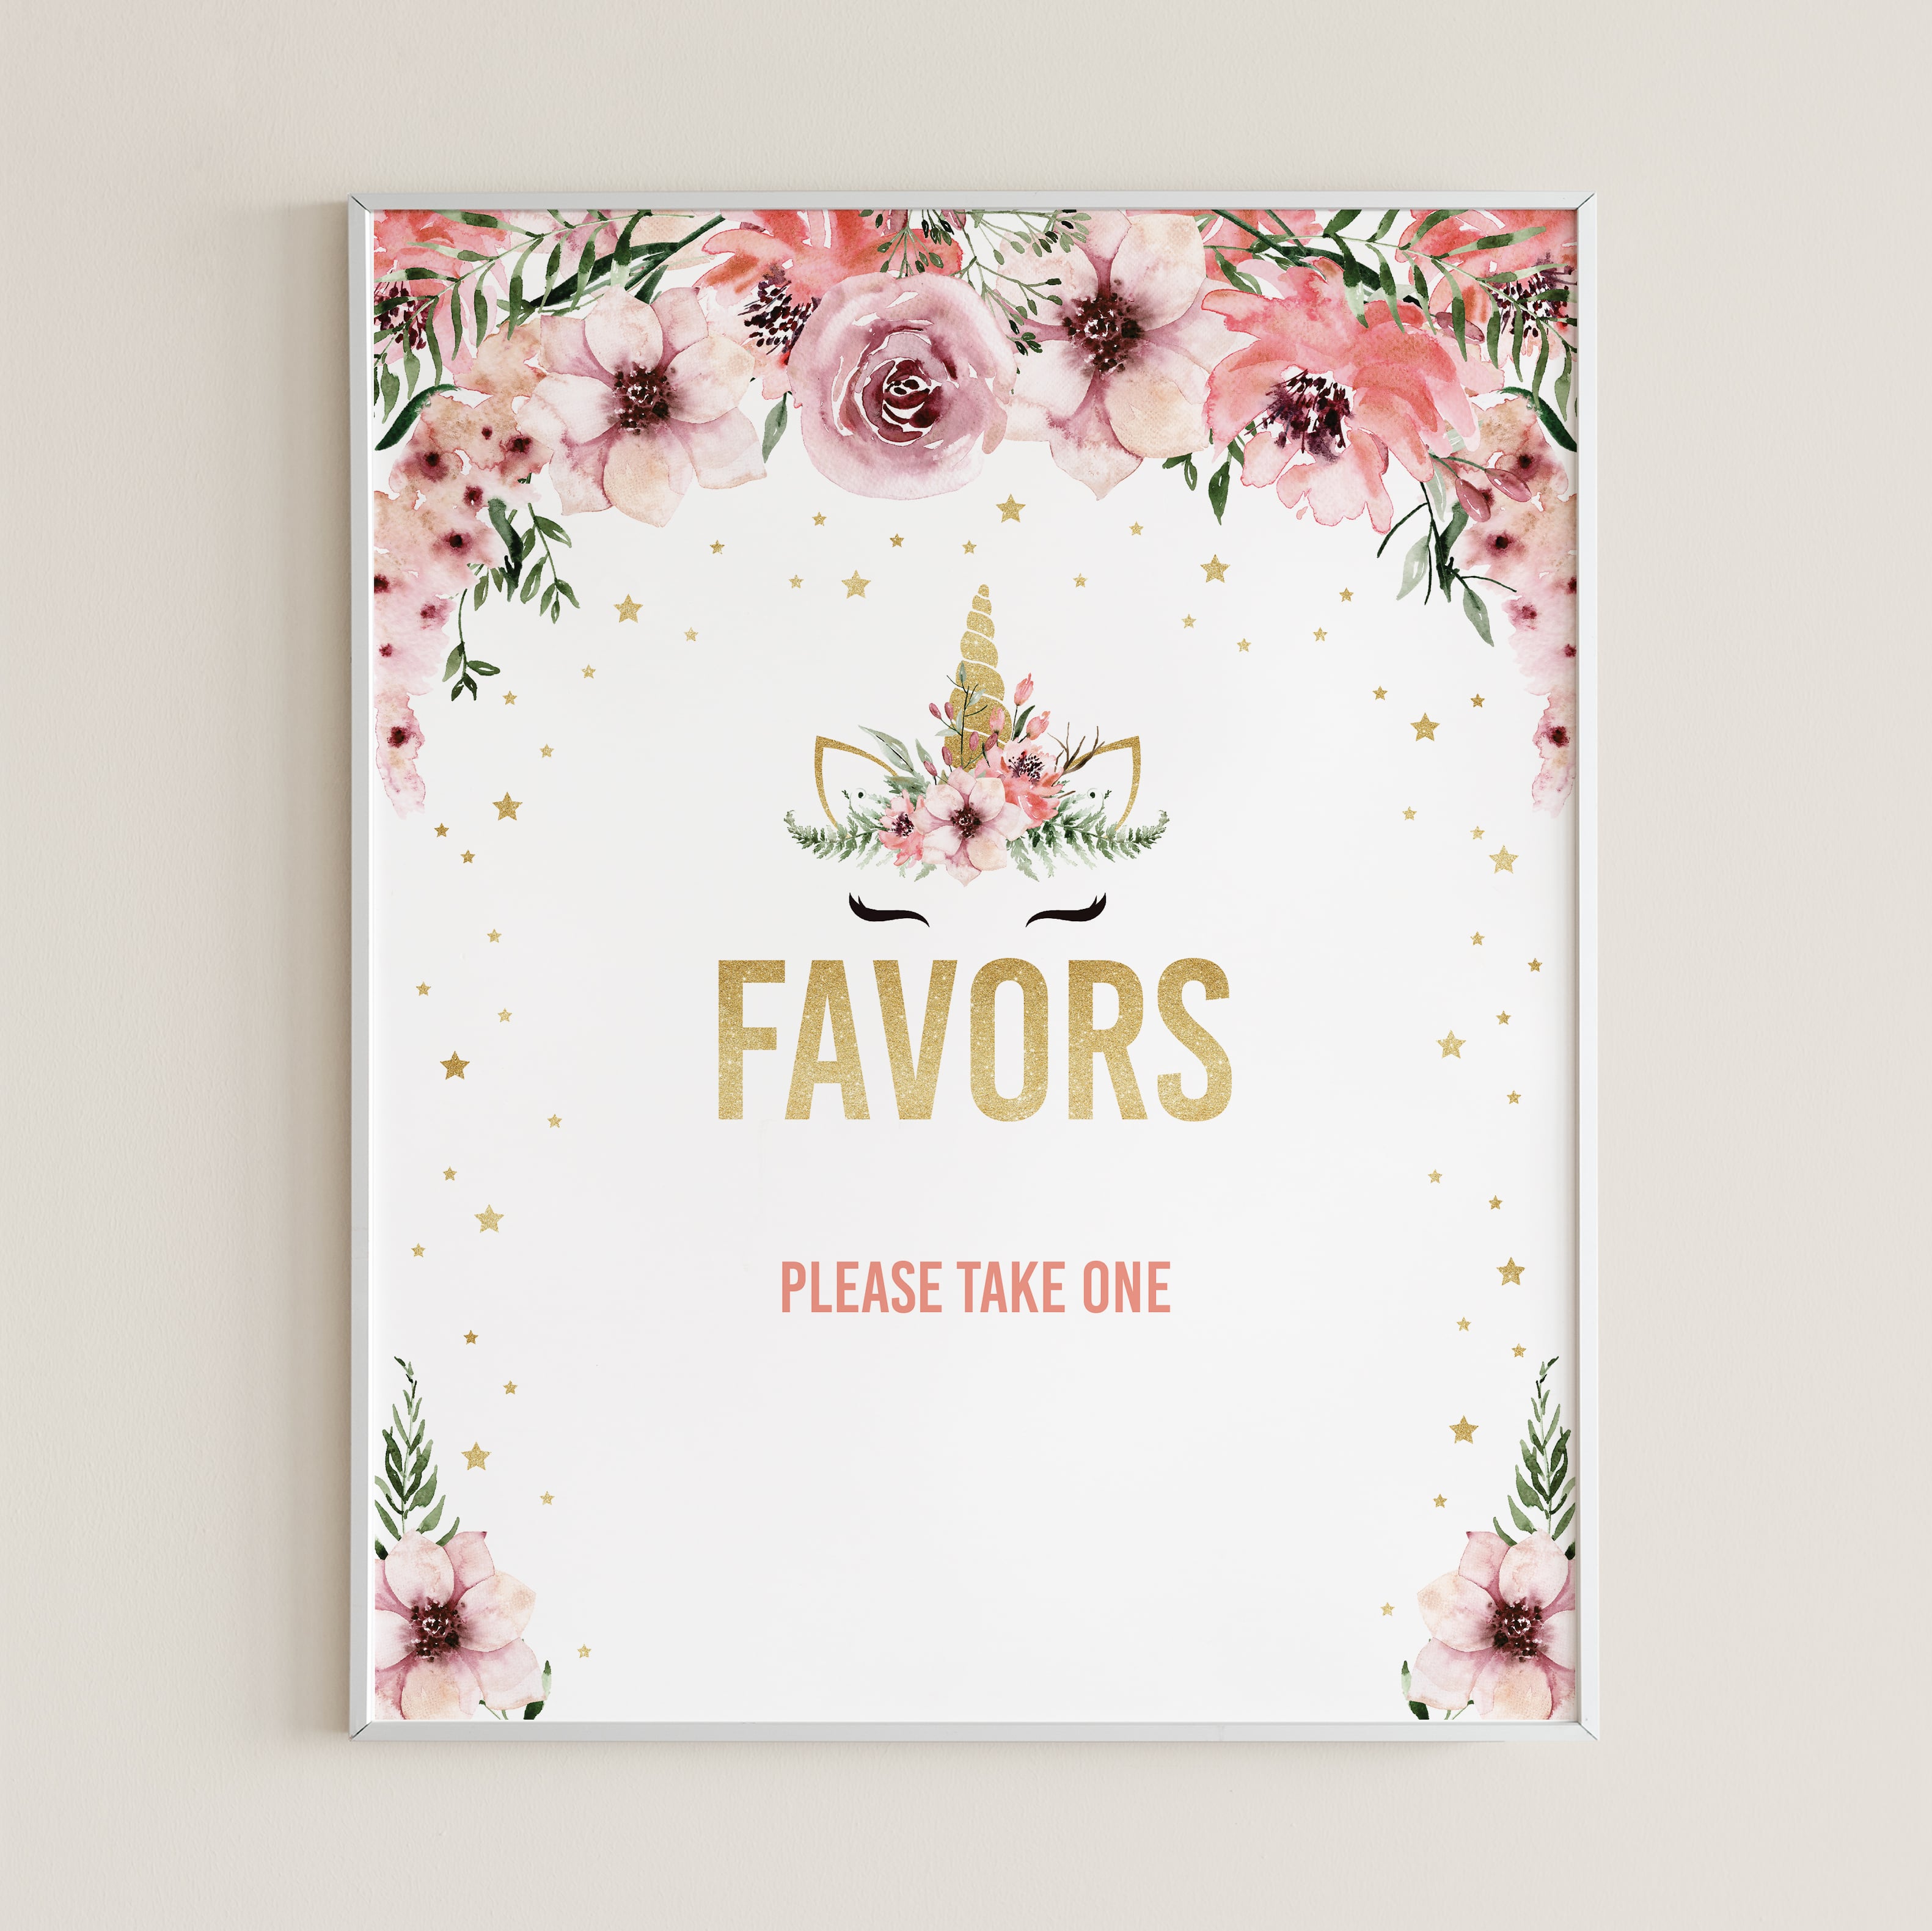 Favors table sign for unicorn themed party by LittleSizzle